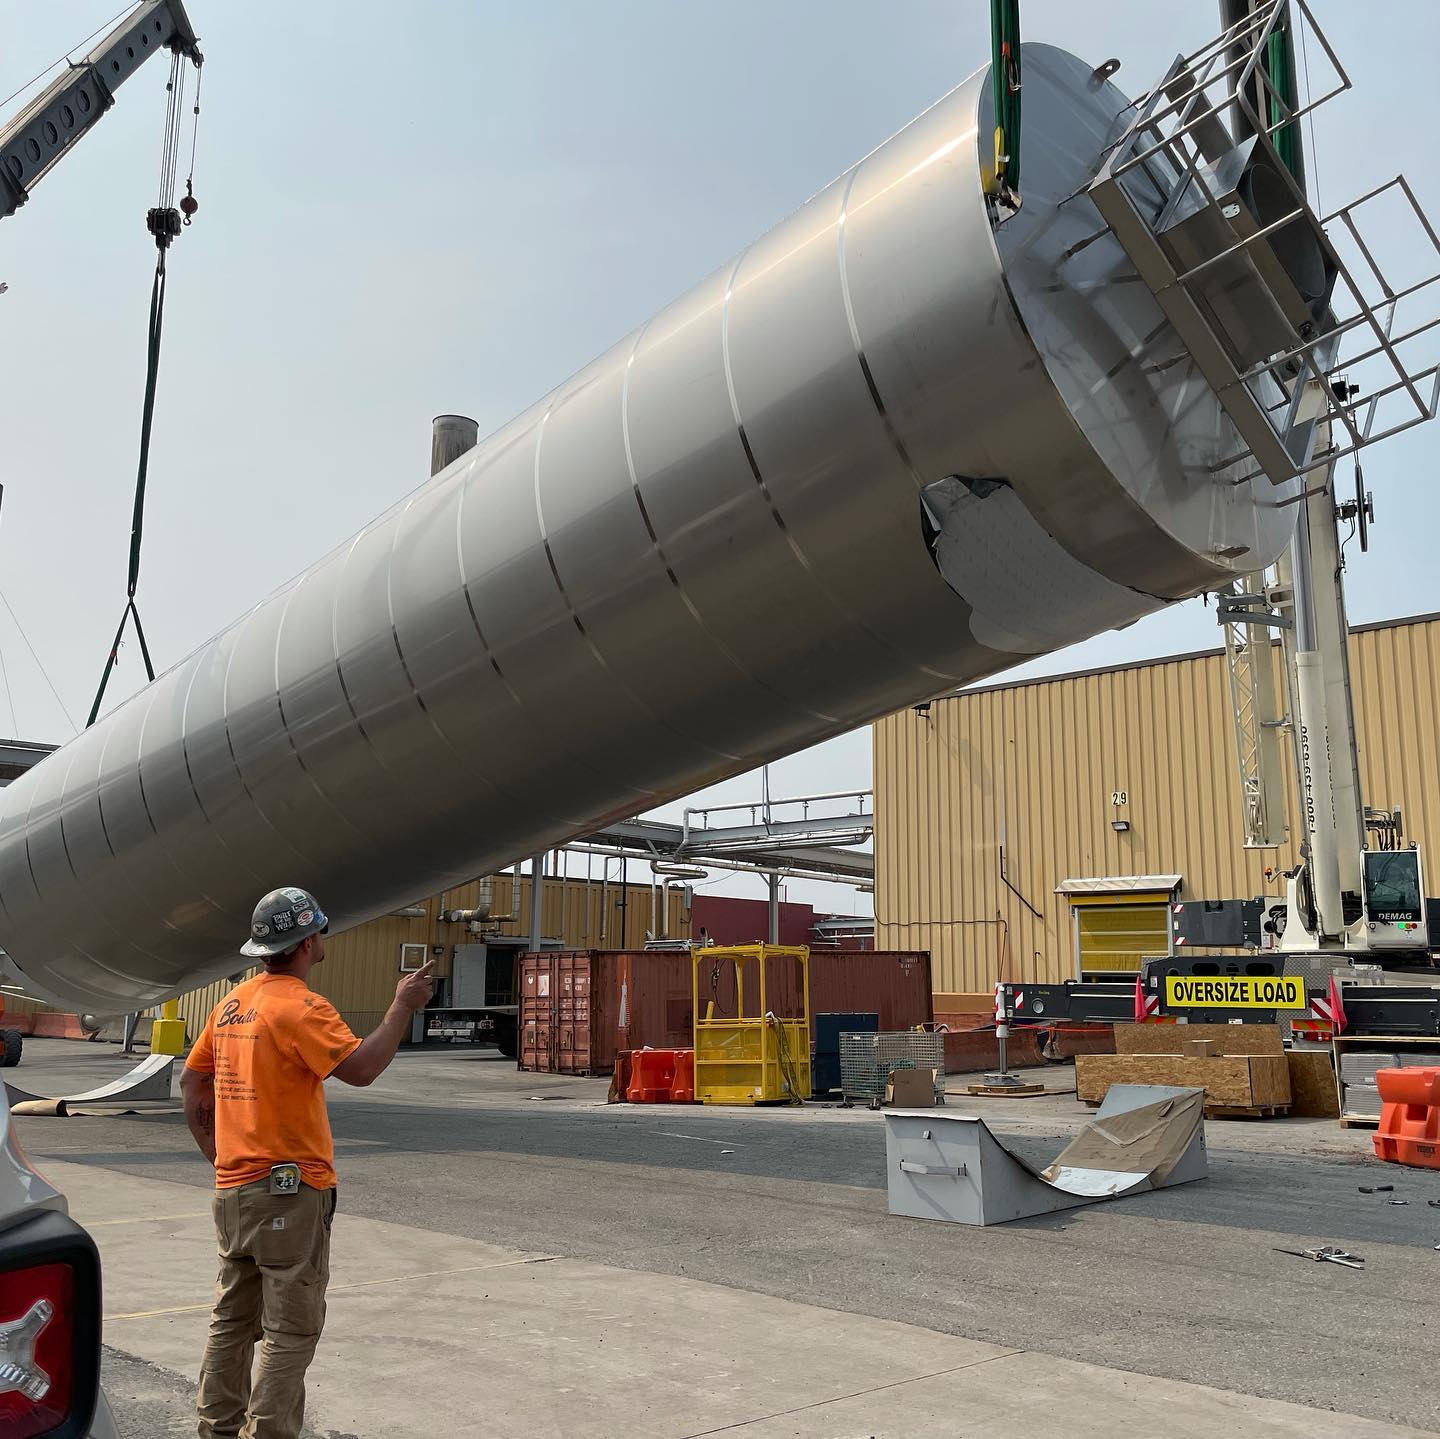 75 ft. long stainless steel tank being installed at the Genesee Brewery